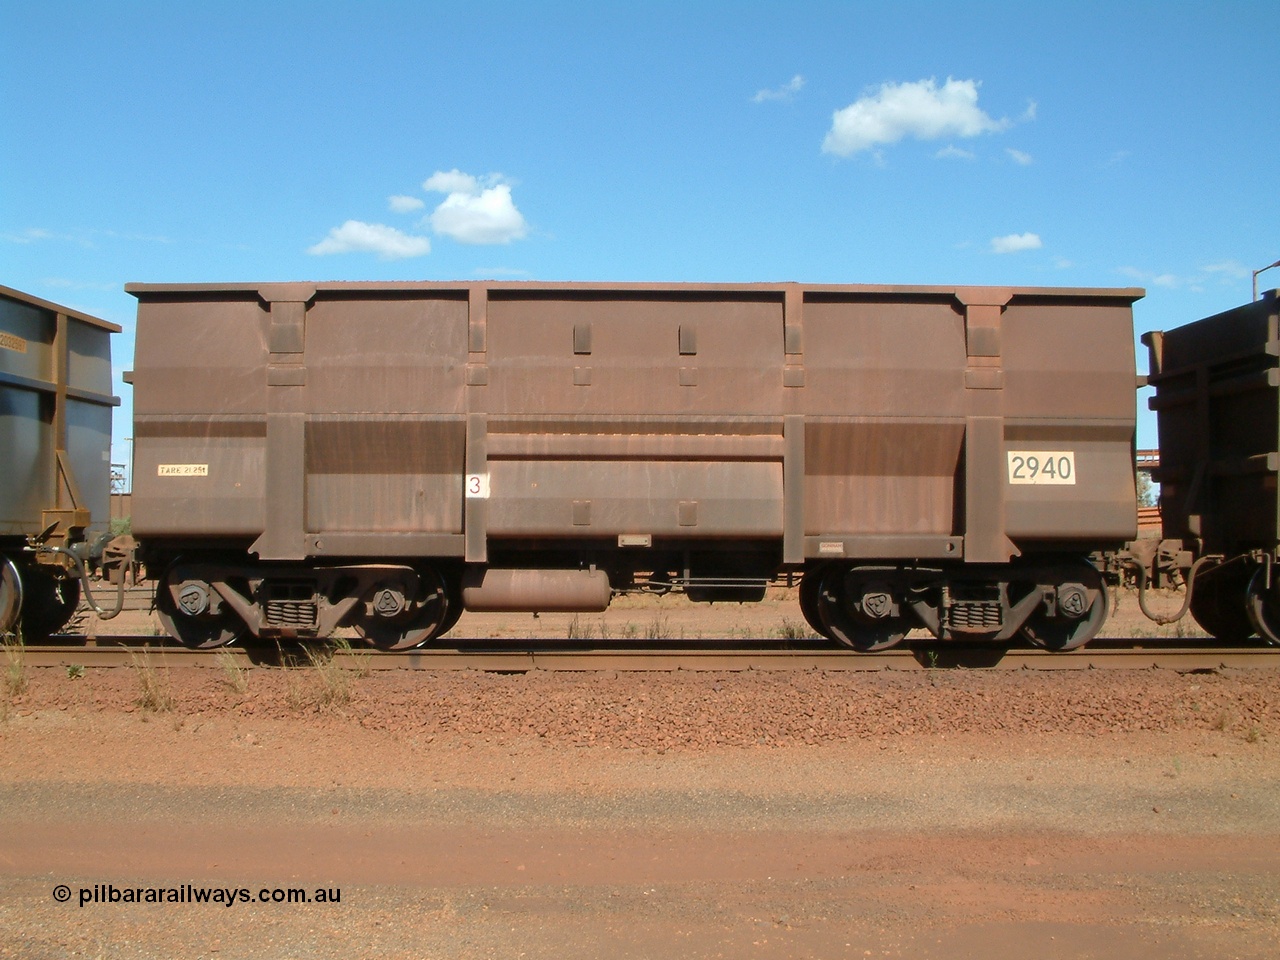 040412 143710
Nelson Point, Goninan built, Lynx Engineering designed ore waggon 2940 are known as Golynx waggons, one of 345 such waggons constructed during 2001 out of 3CR12 stainless steel in an effort to eliminate painting and to reduce wear on the waggon body. 12th April 2004.
Keywords: 2940;Goninan-WA;Golynx;BHP-ore-waggon;